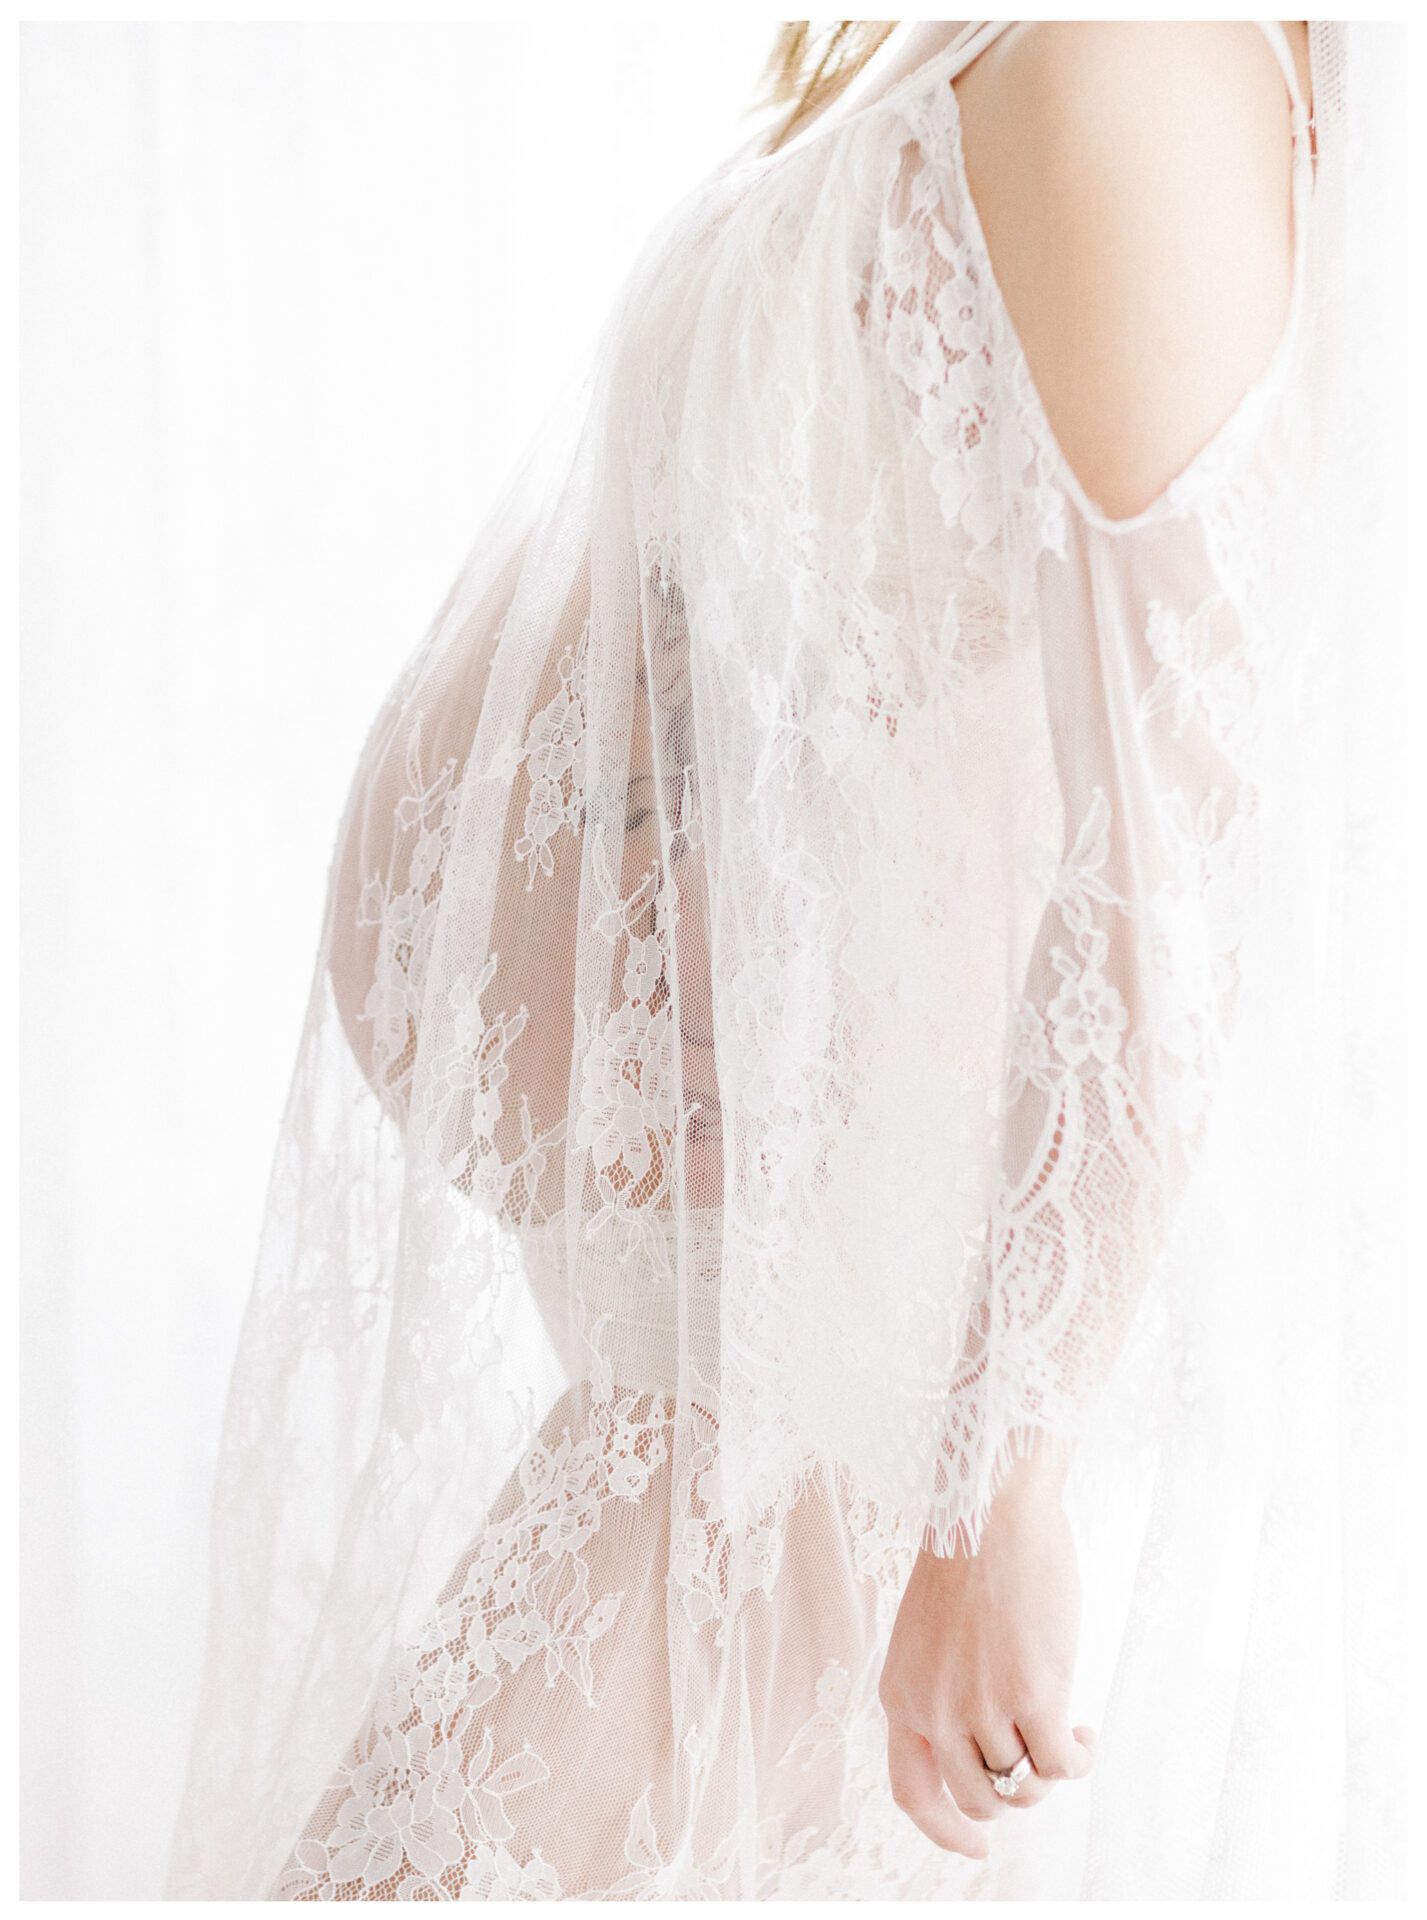 Winter Freire Photography | Fine Art Maternity Boudoir | Expecting mother wearing a sheer lace dress by the window light